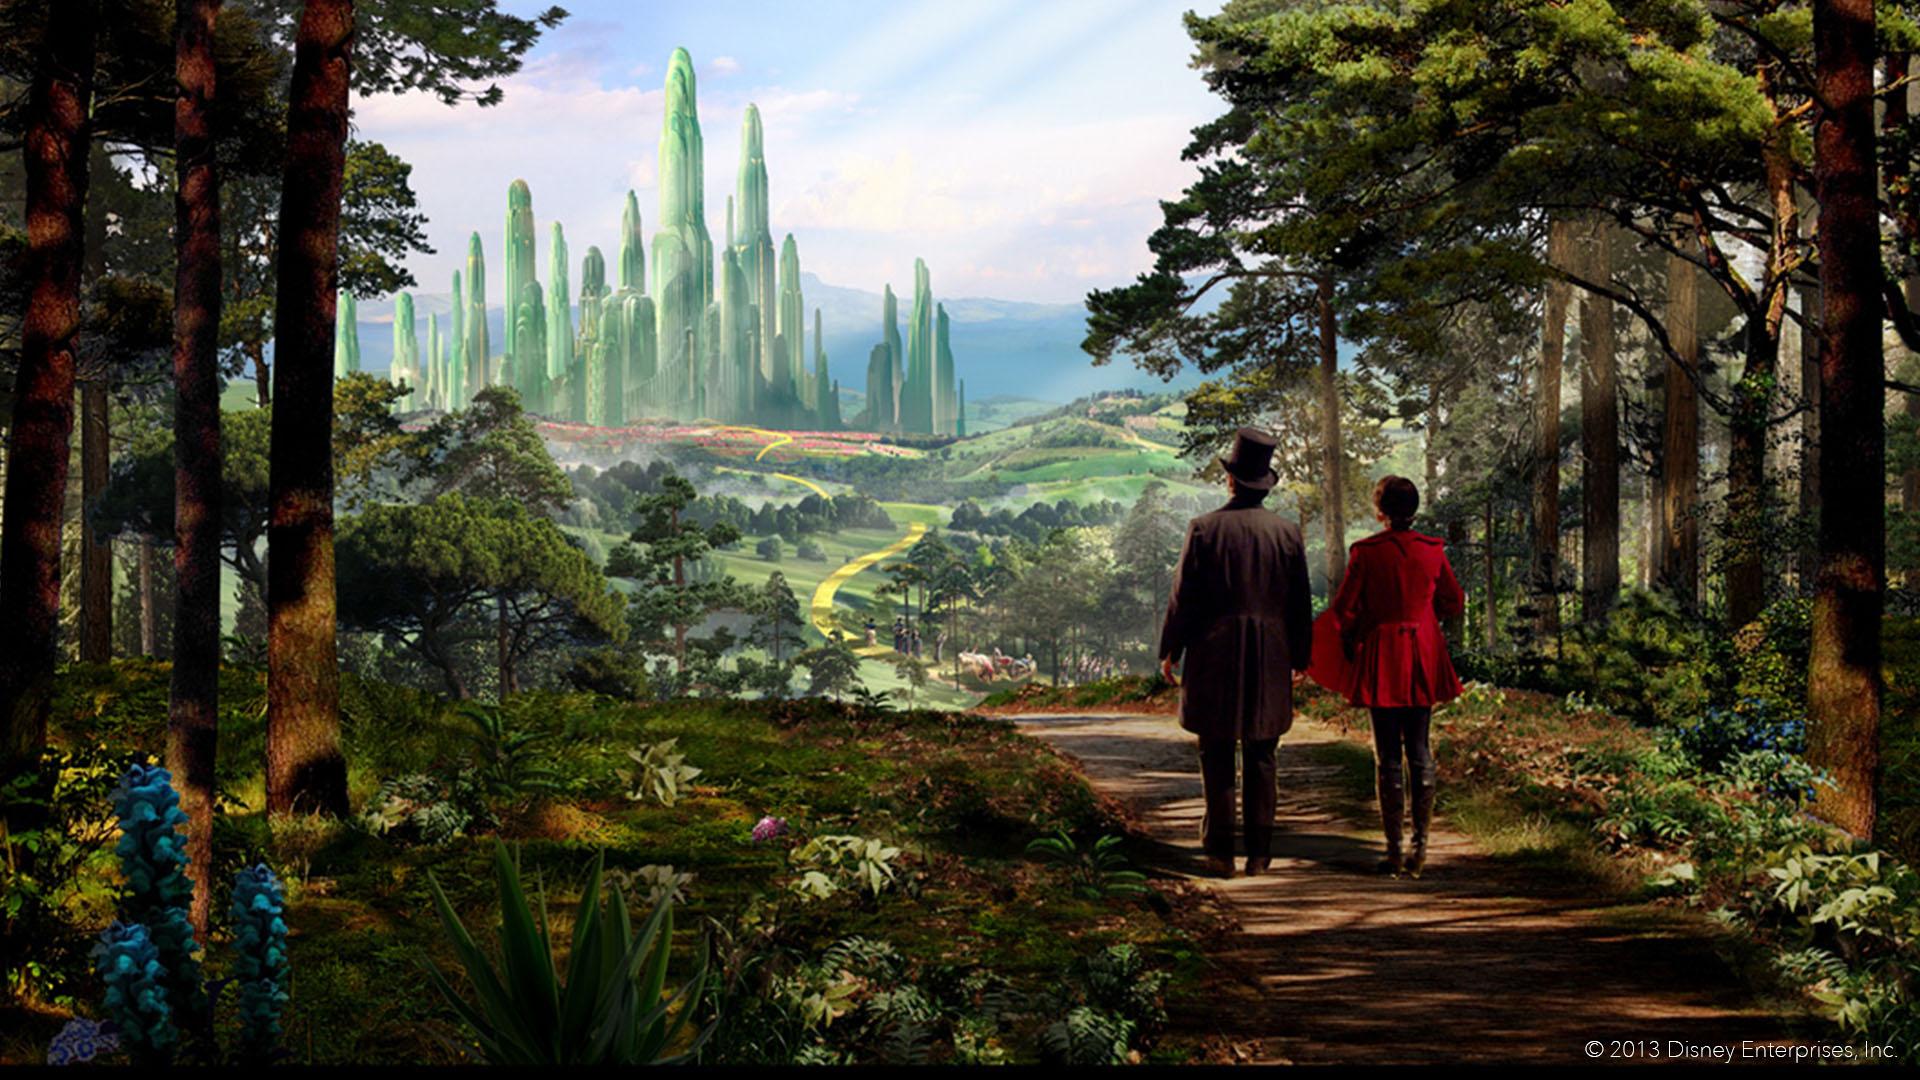 Find out why Sony Pictures used Katana for Oz the Great and Powerful